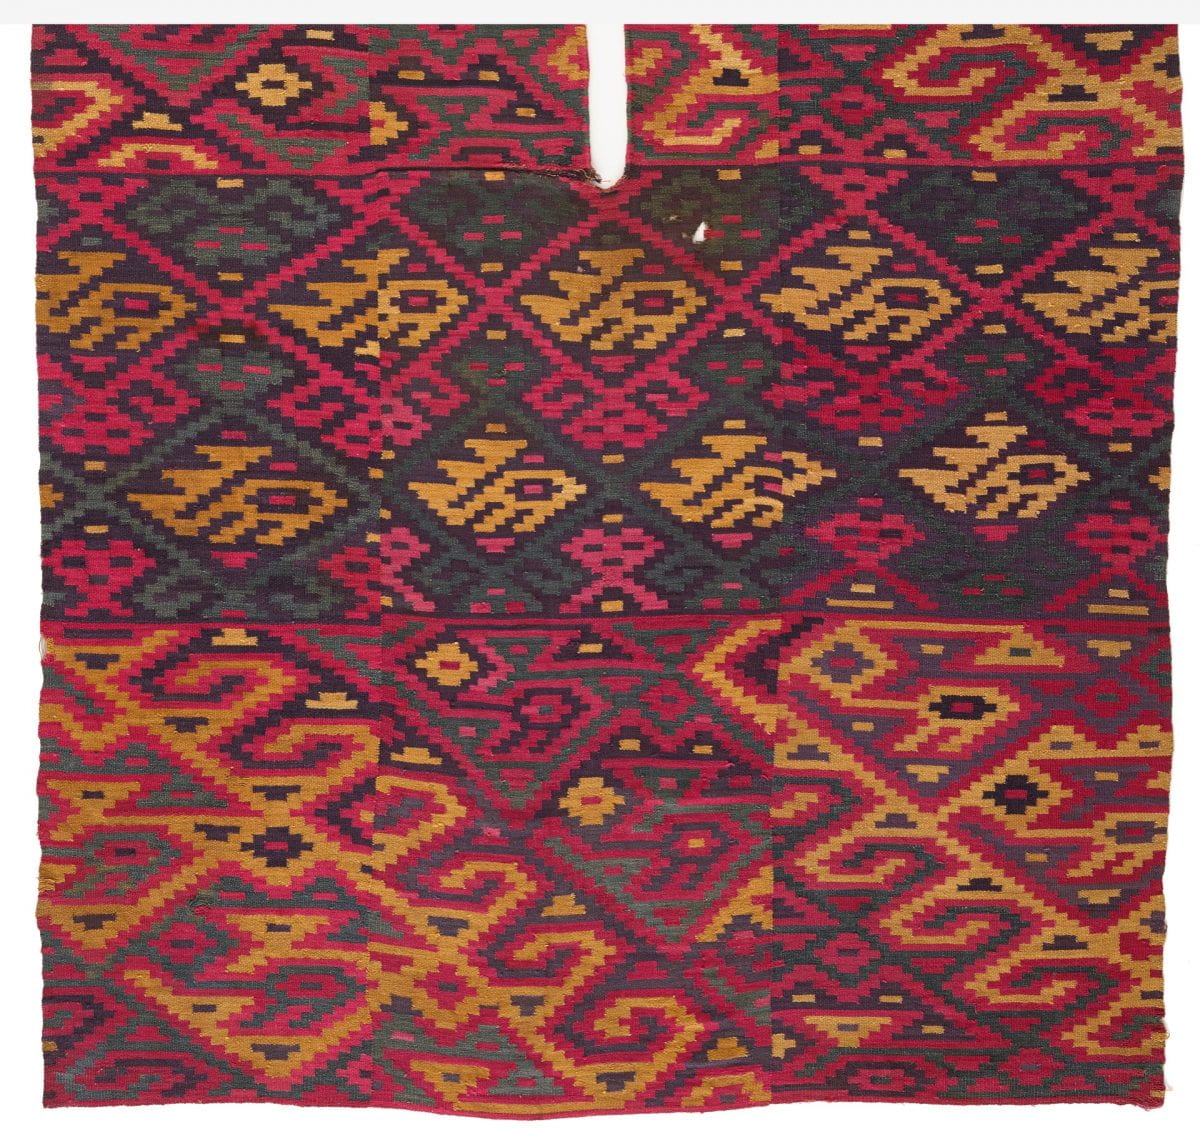 Colorful poncho with bird and geometric designs